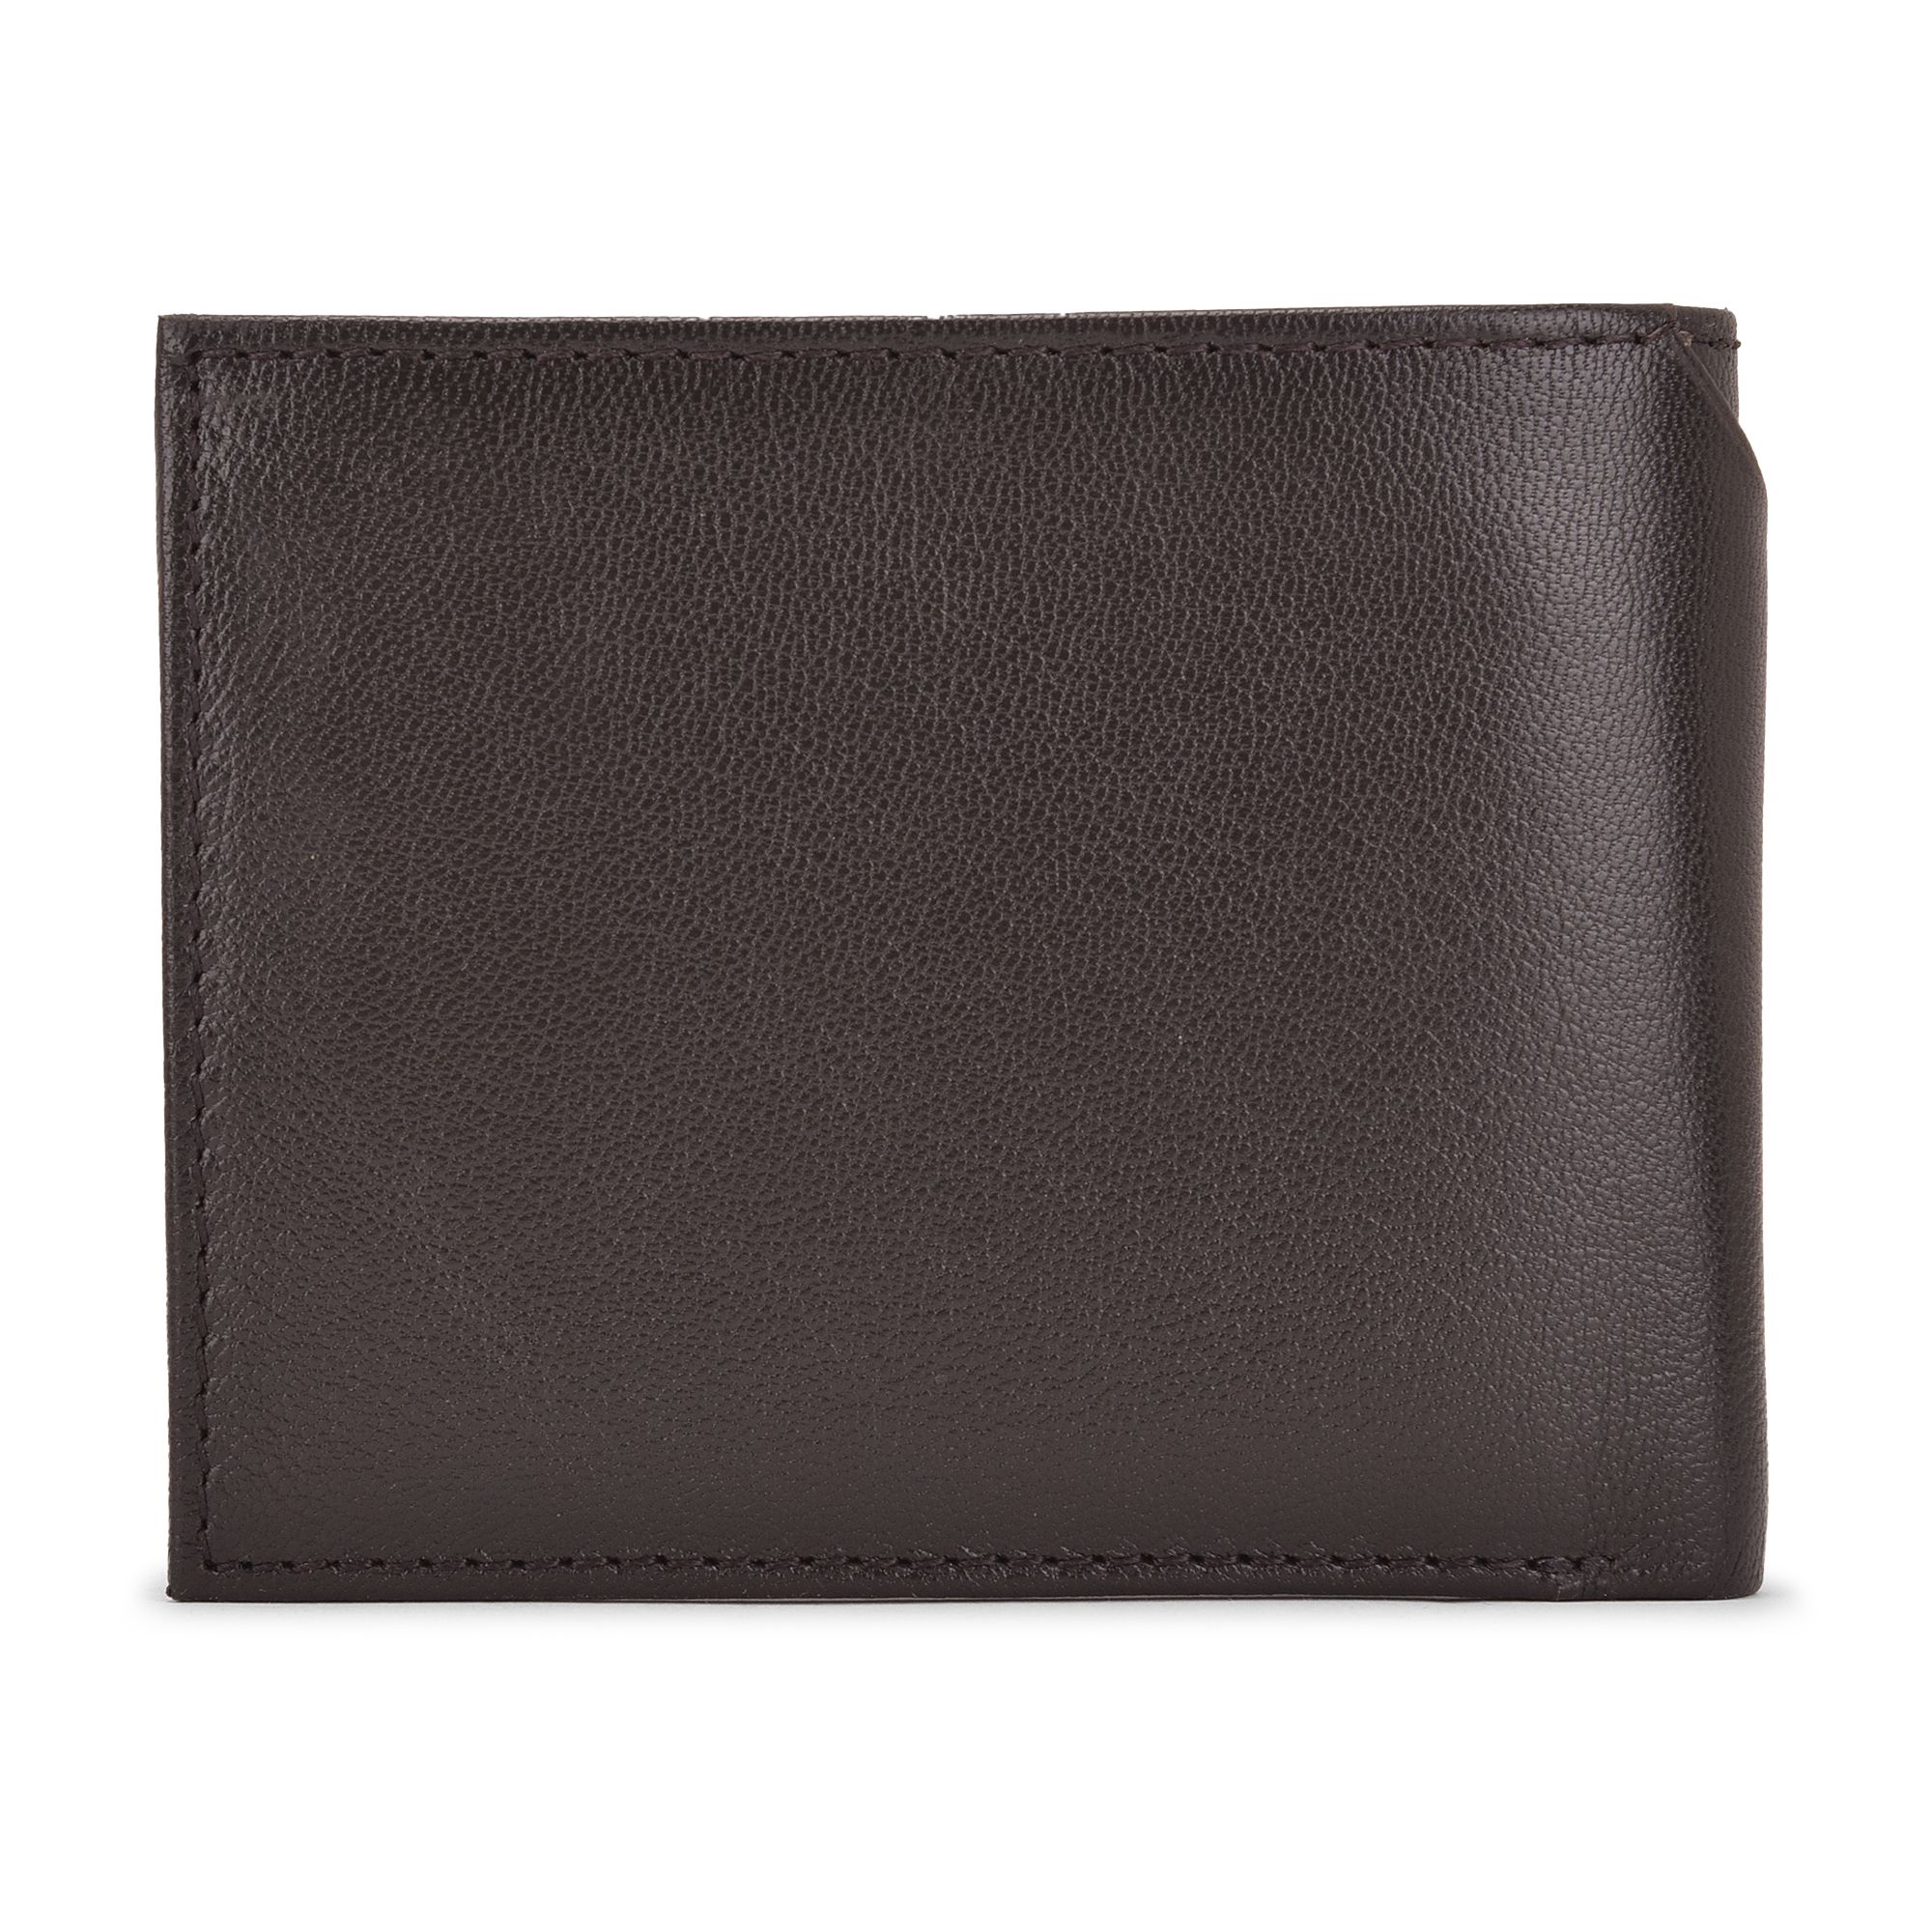 brown tan bi fold wallet 971 mrp 1 495 35 % off prices include taxes ...